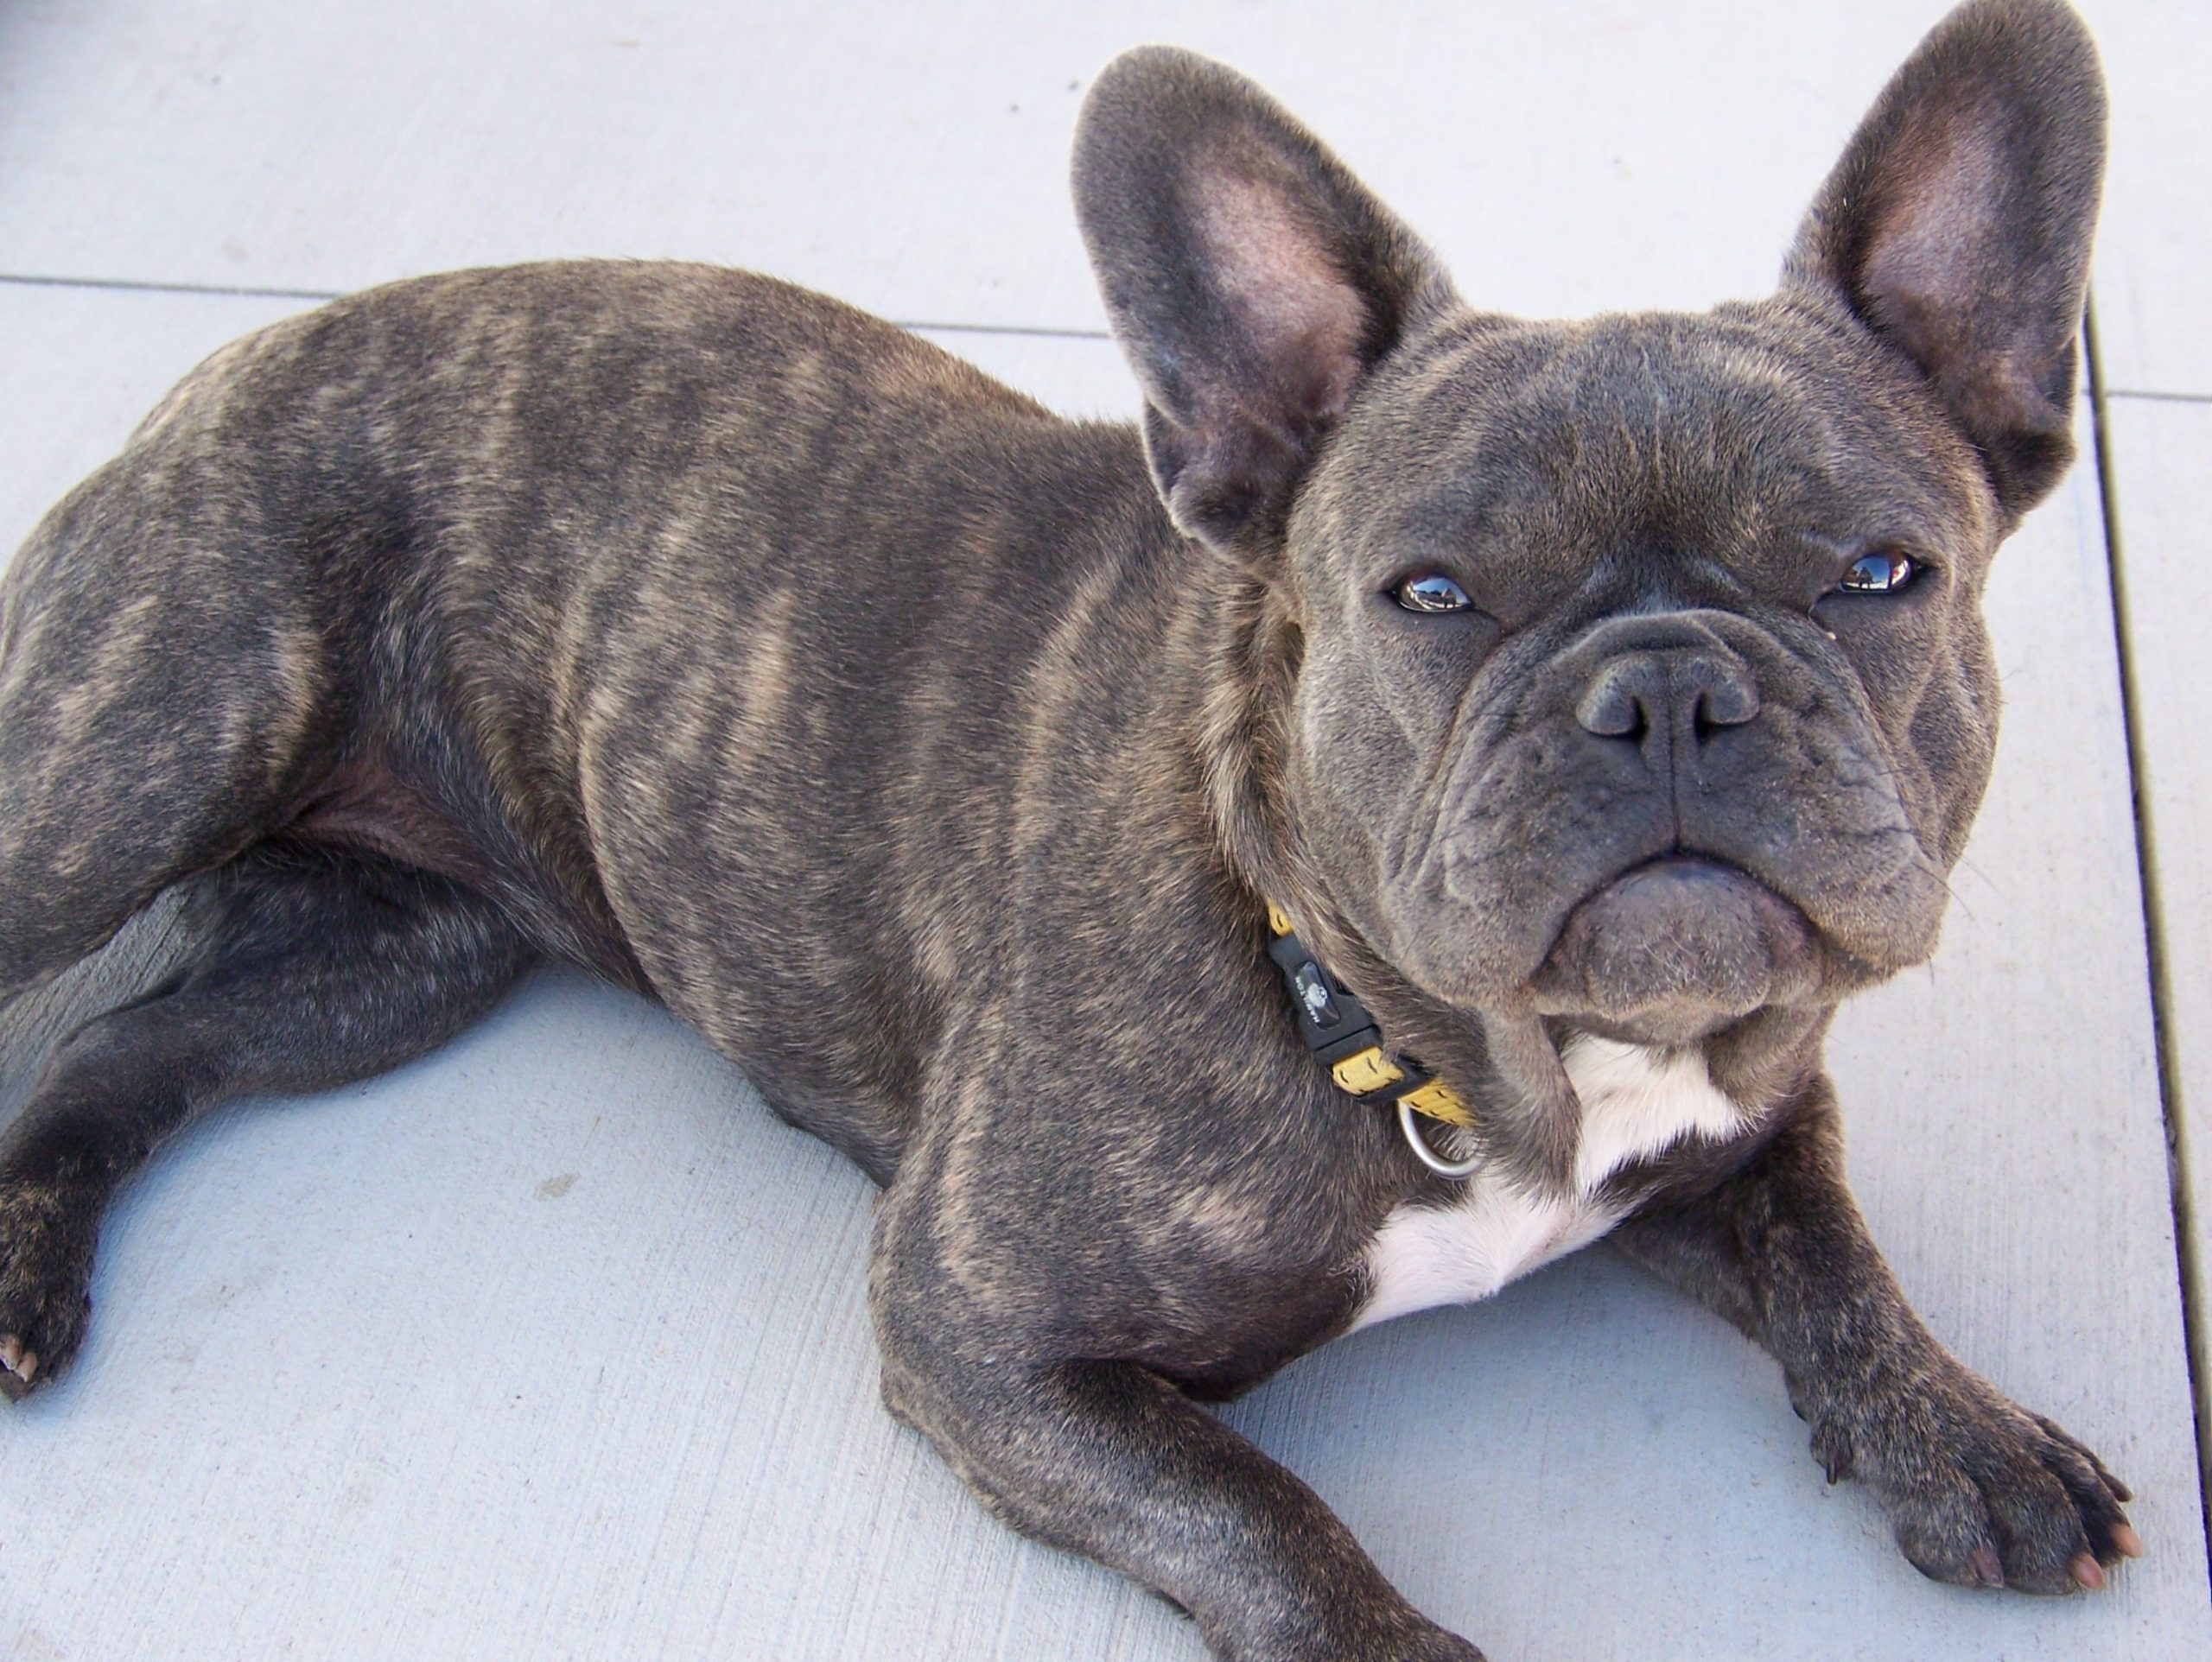 Brindle French Bulldog: The dog with tiger stripes